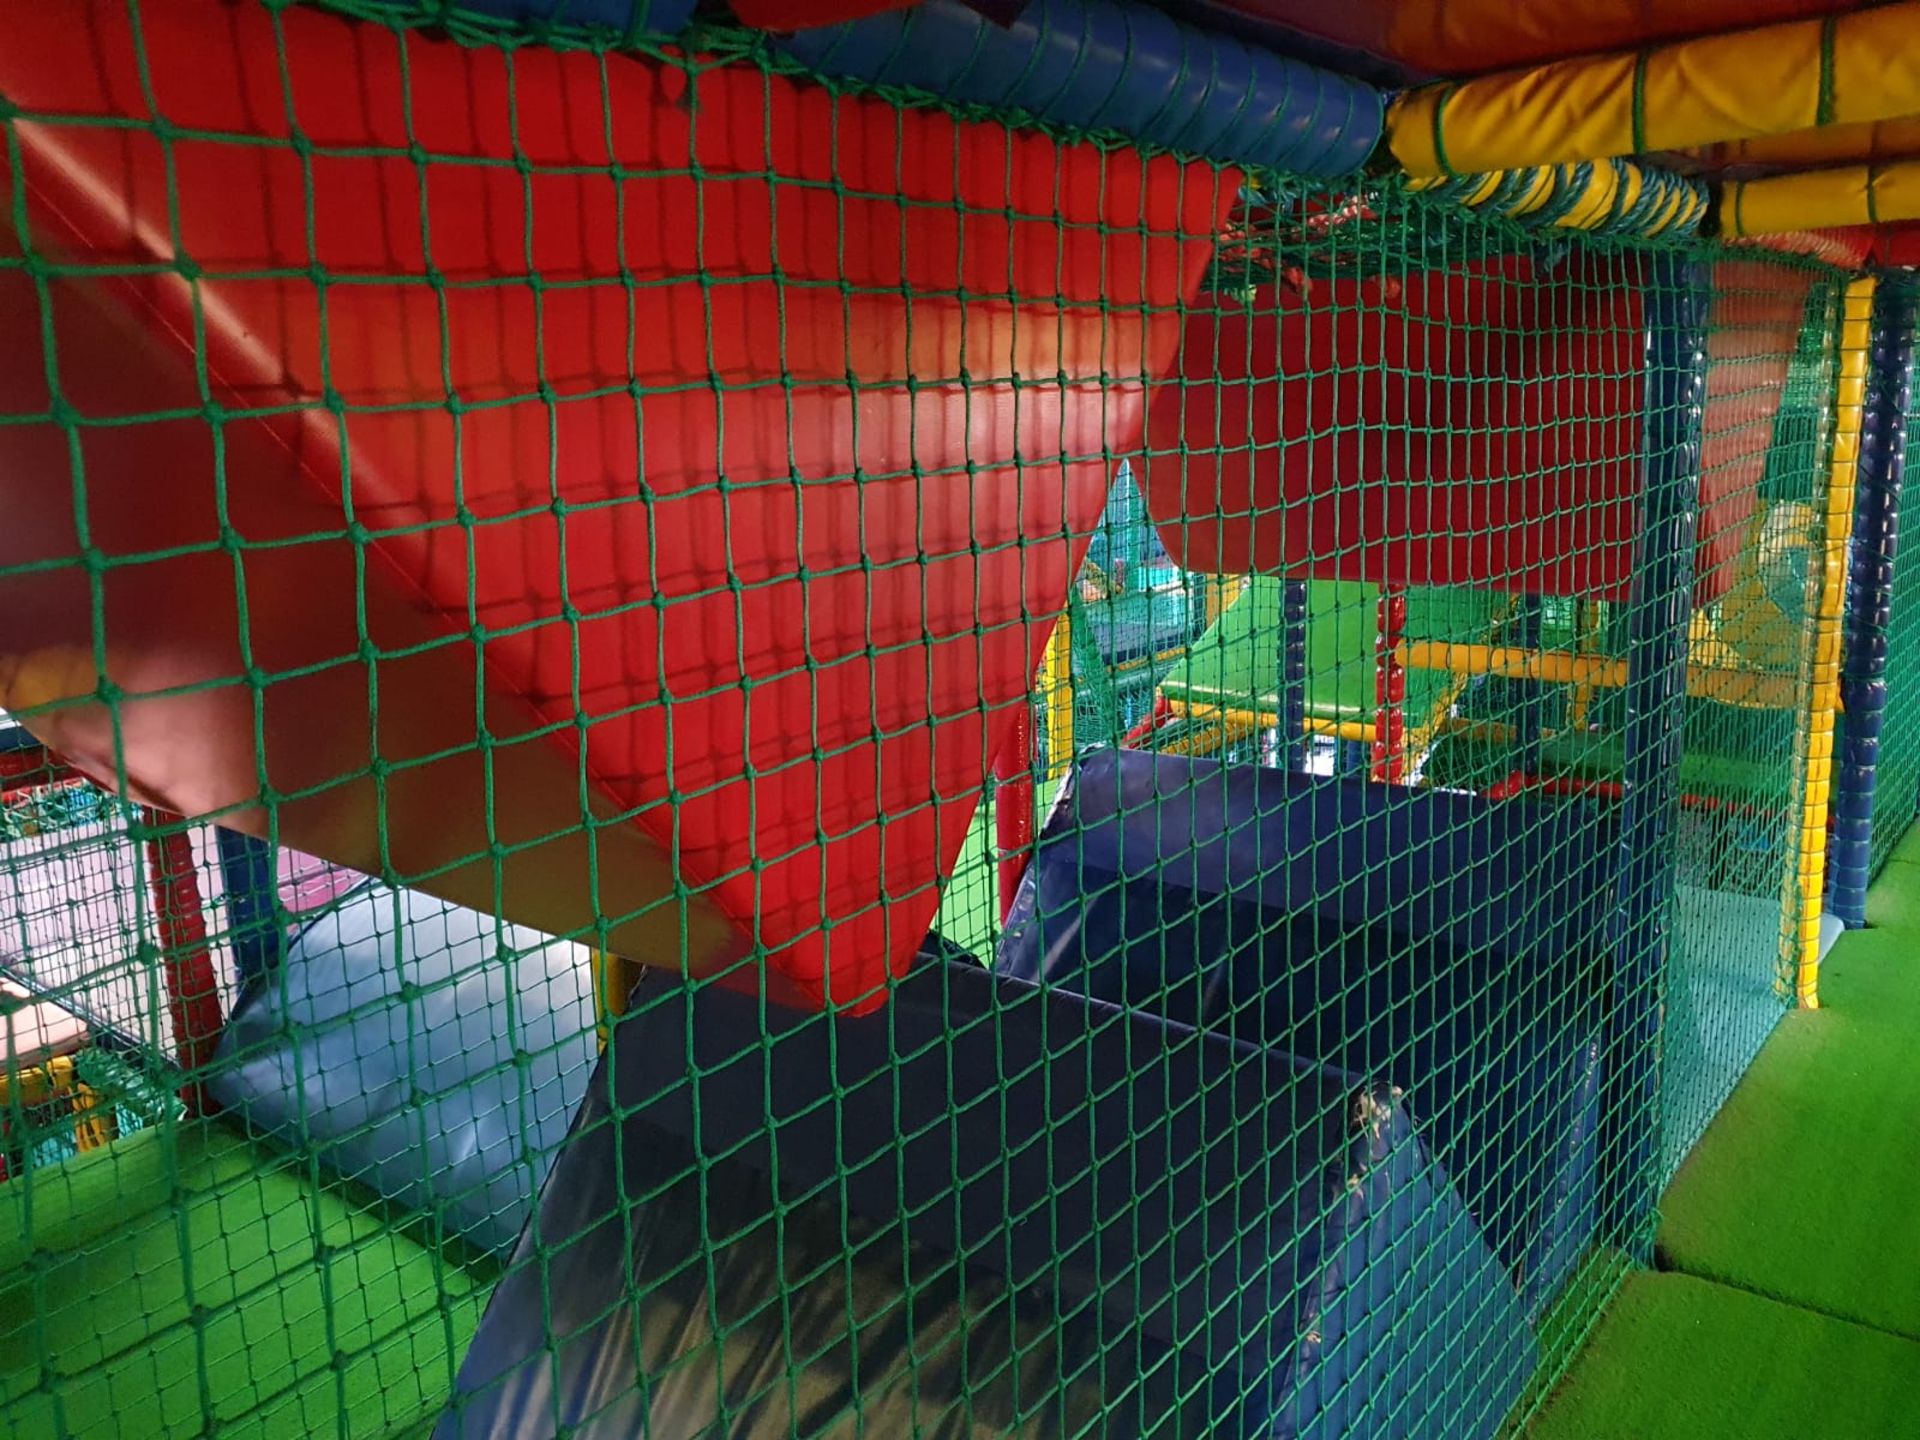 Bramleys Big Adventure Playground - Giant Action-Packed Playcentre With Slides, Zip Line Swings, - Image 97 of 128